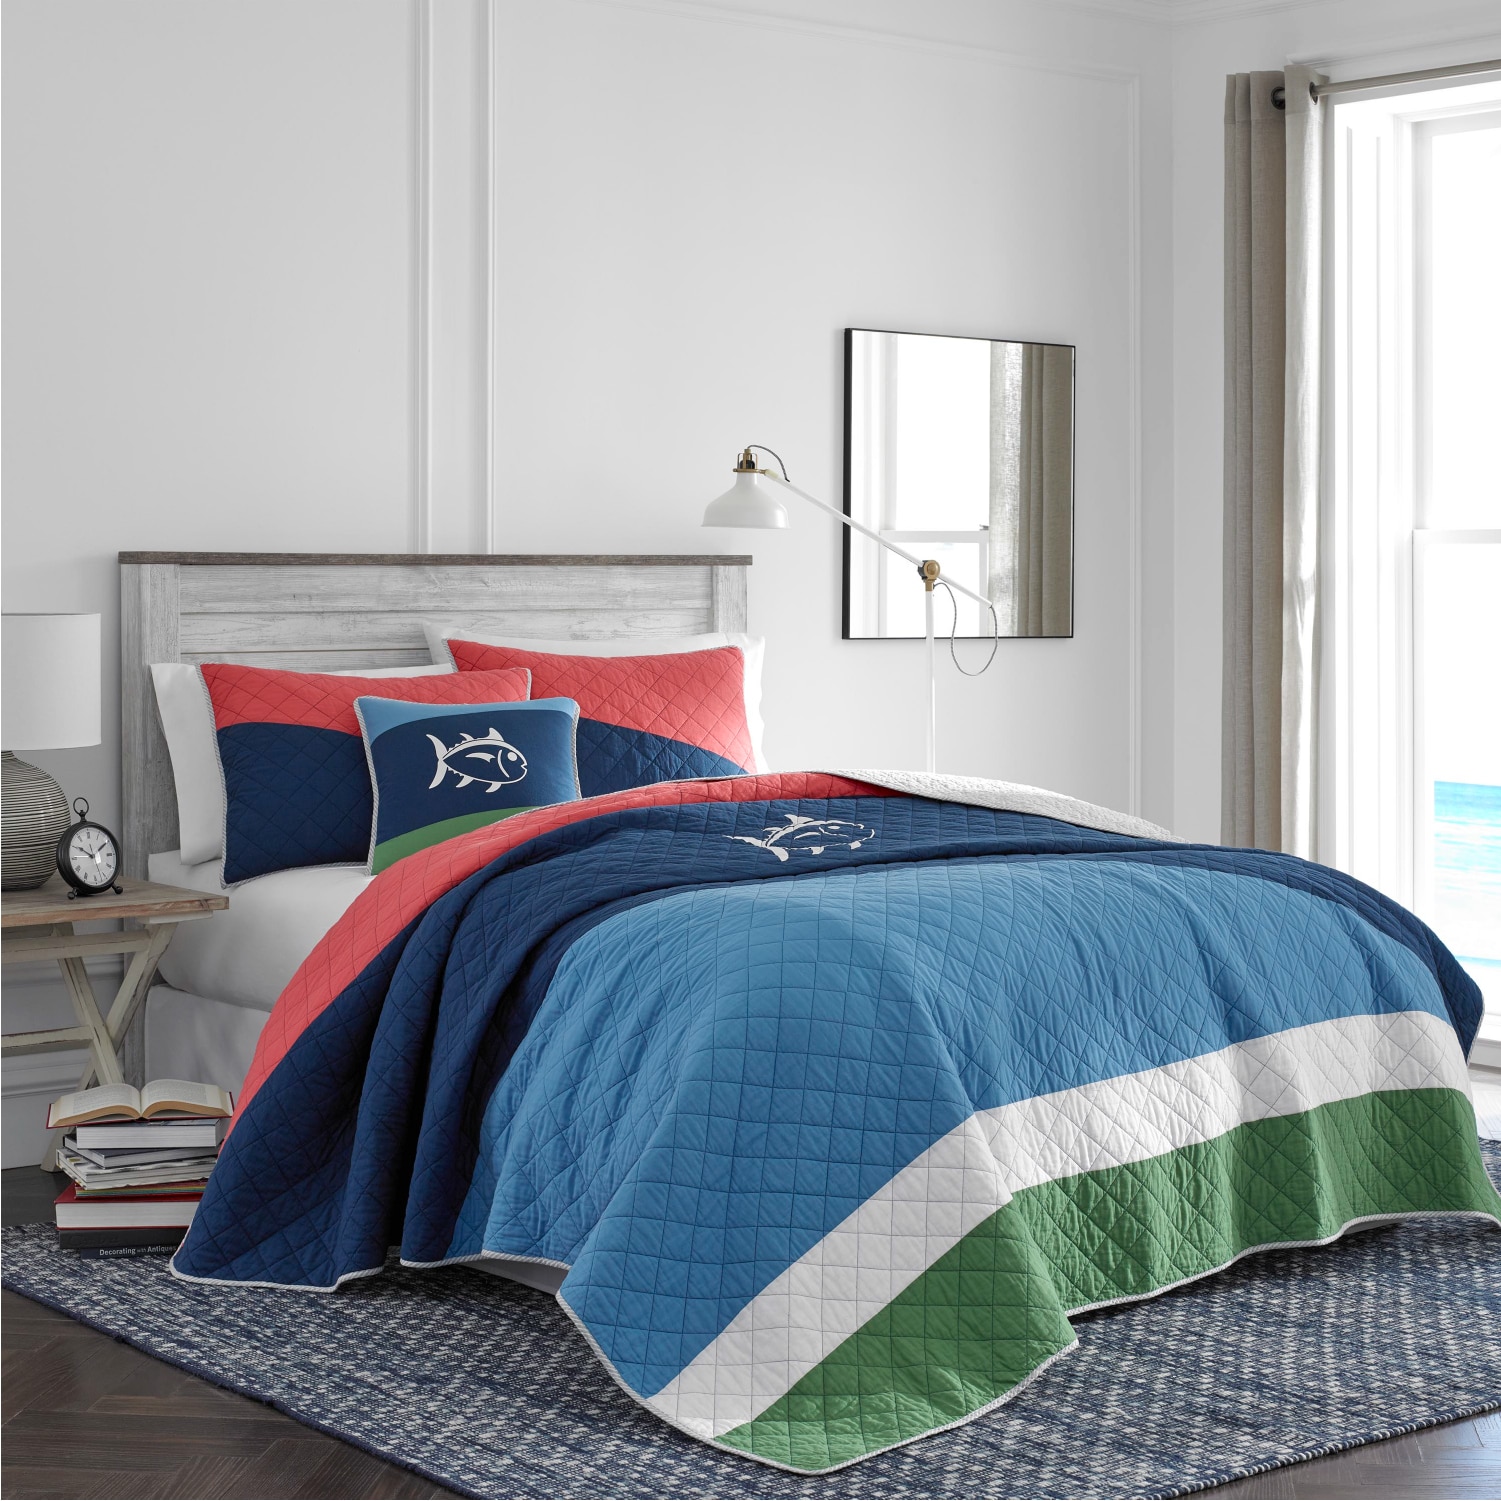 Southern Tide Bedding: Sheets, Comforters & More